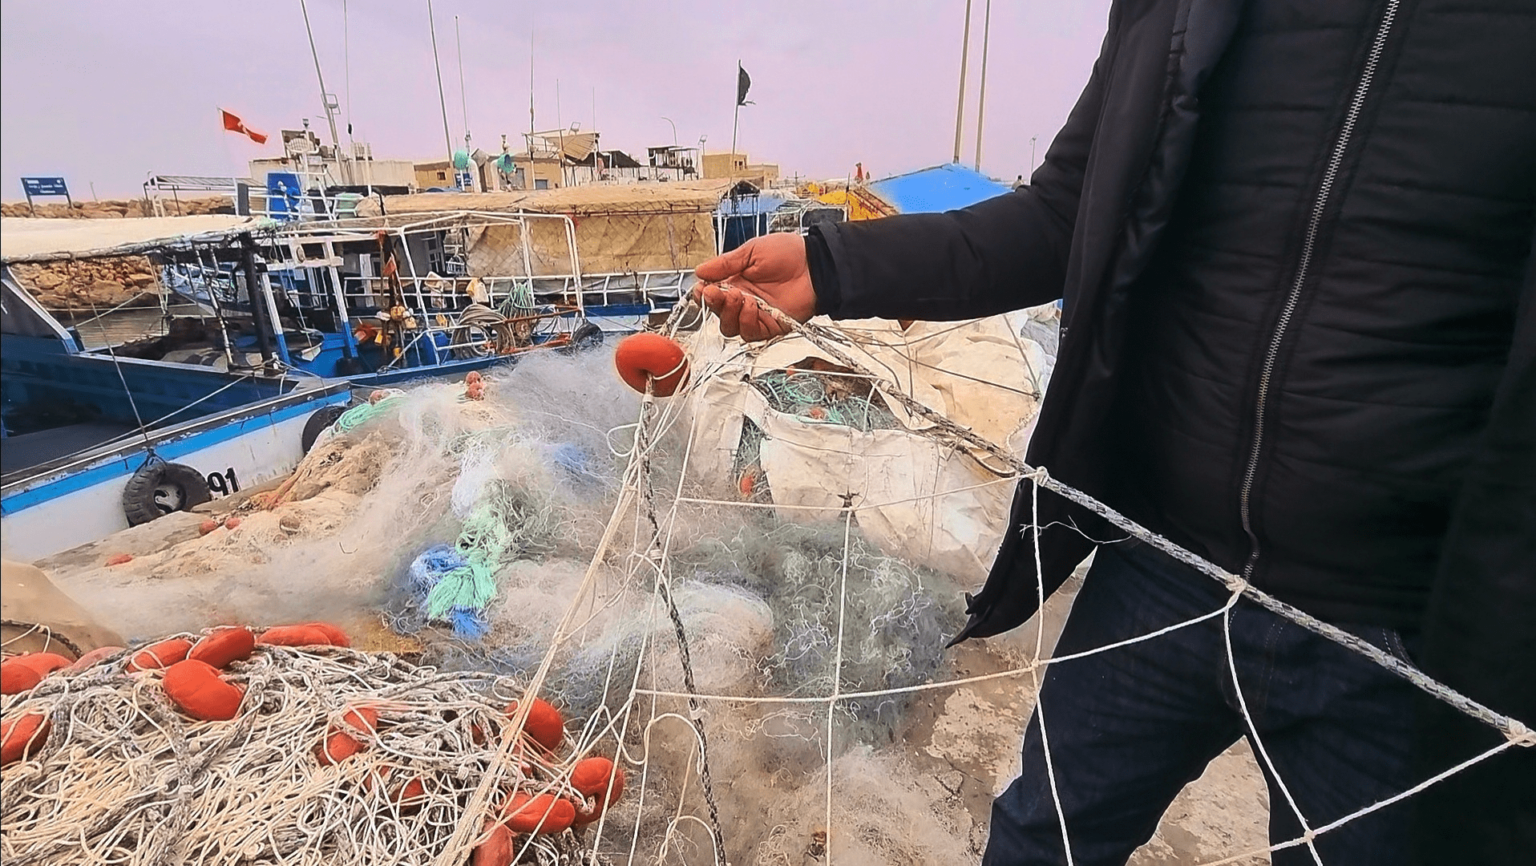 A fisherman showing a net on his boat in a port